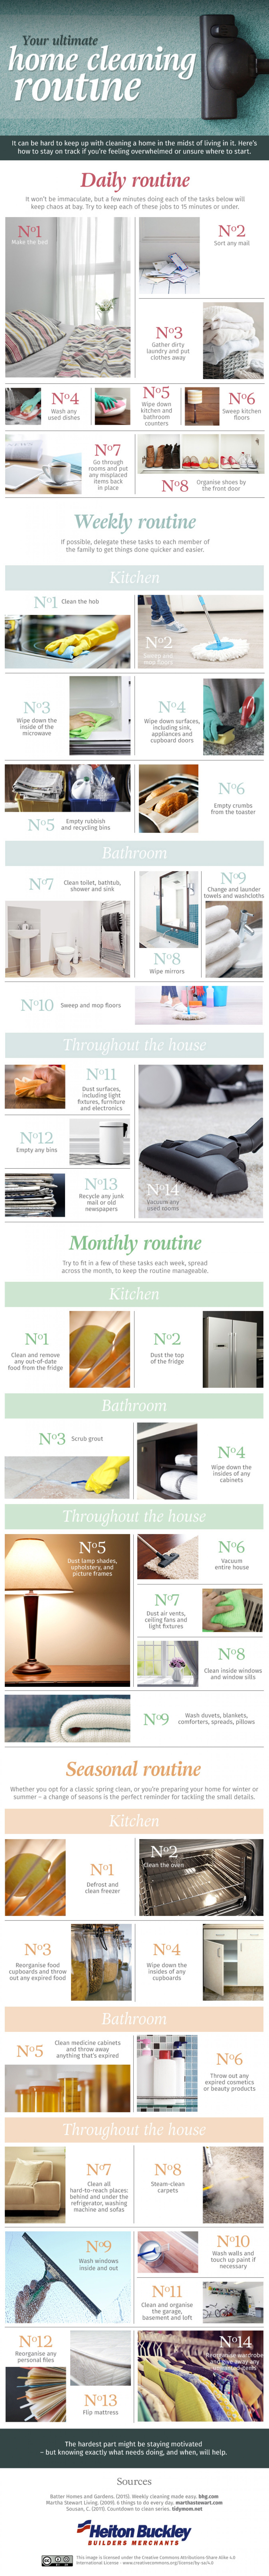 your-ultimate-home-cleaning-routine